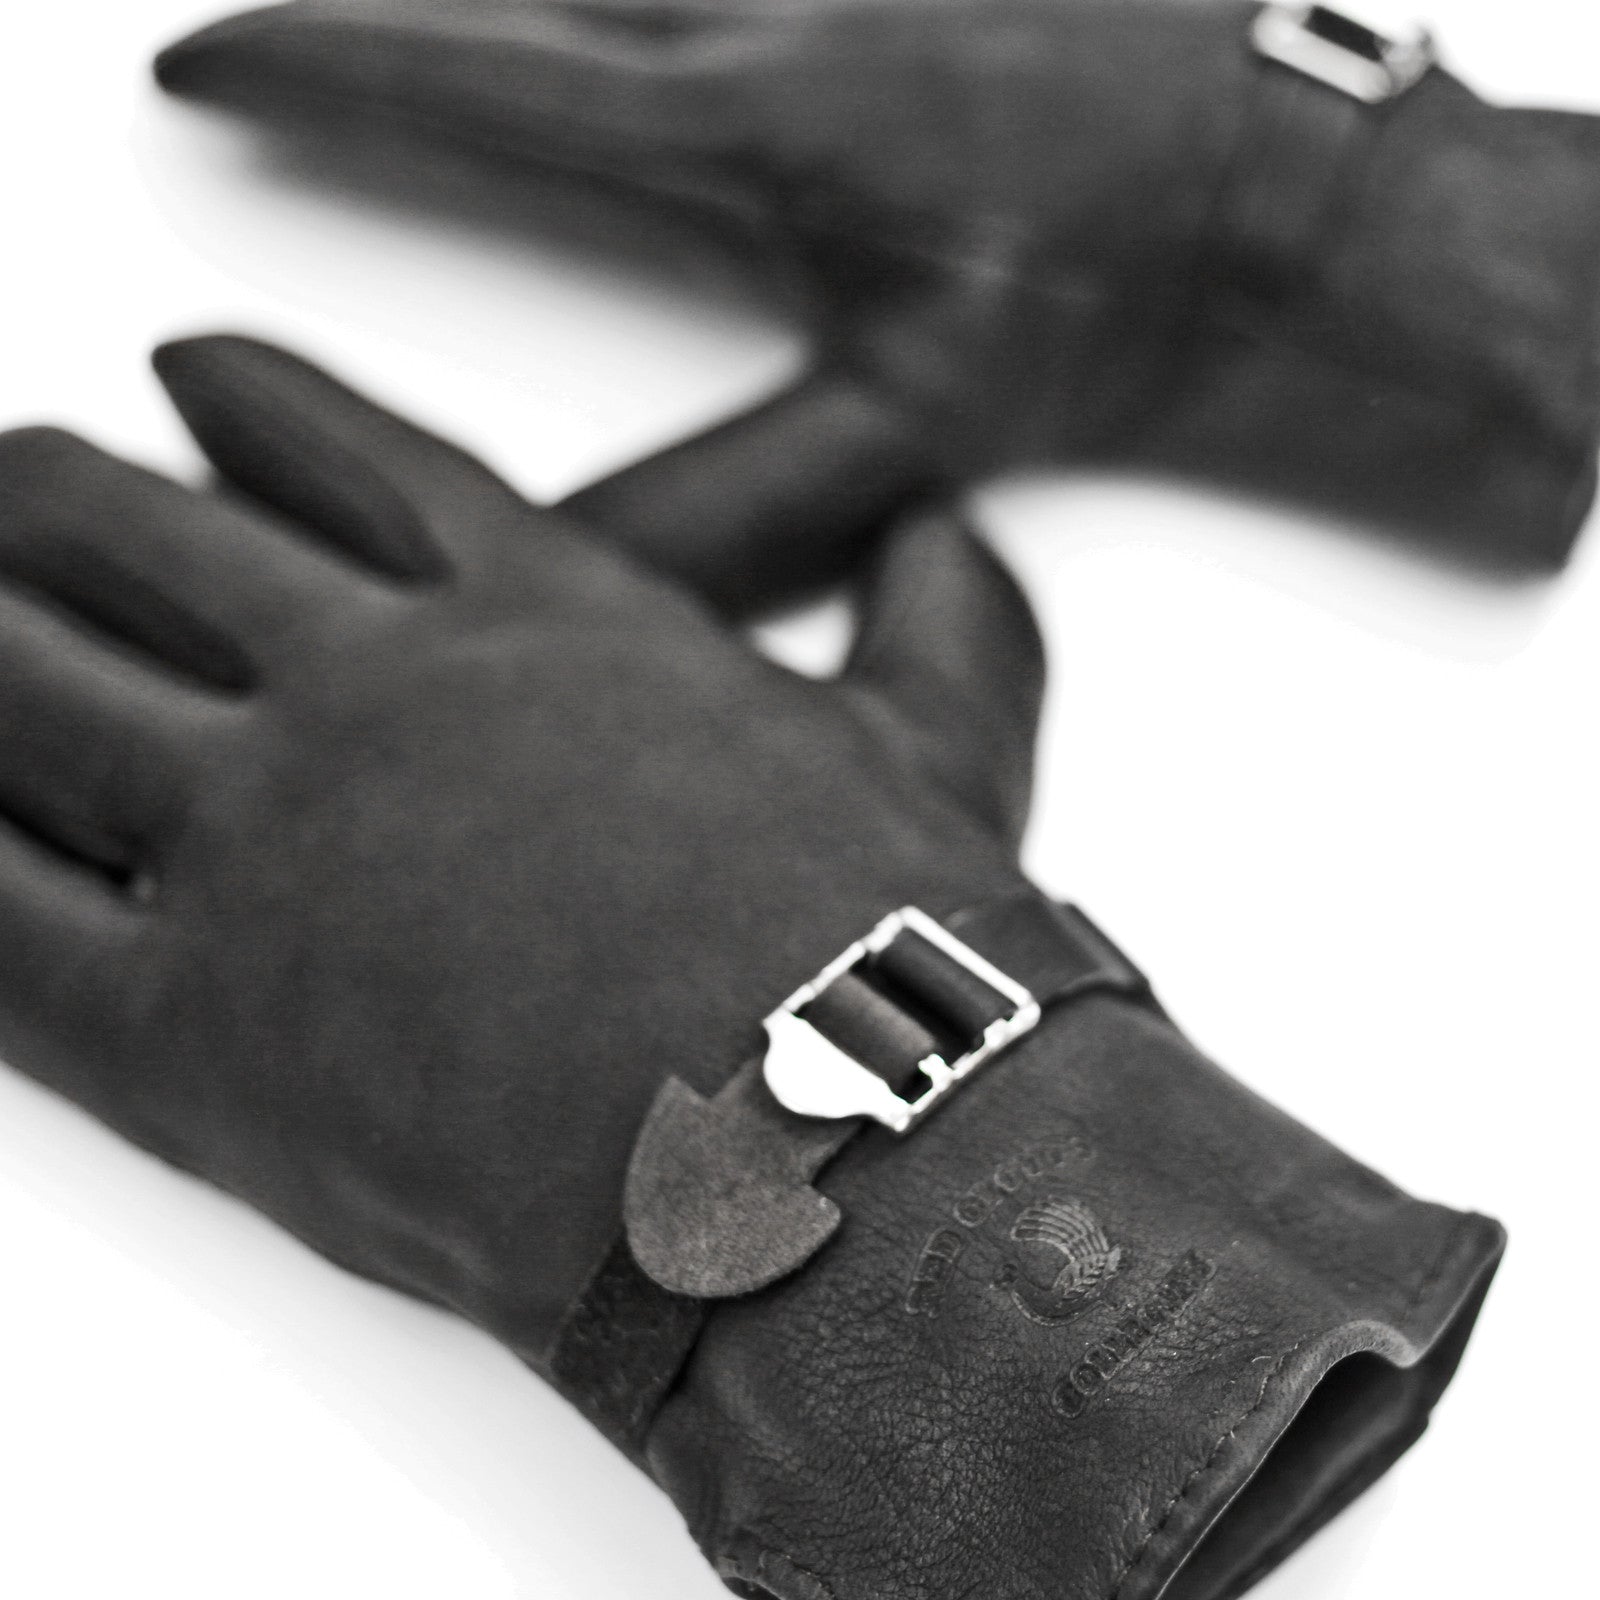 leather glove, made in usa glove, black leather glove, geier glove, red clouds glove, moto glove, motorcycle gloves, thin leather gloves, driving glove